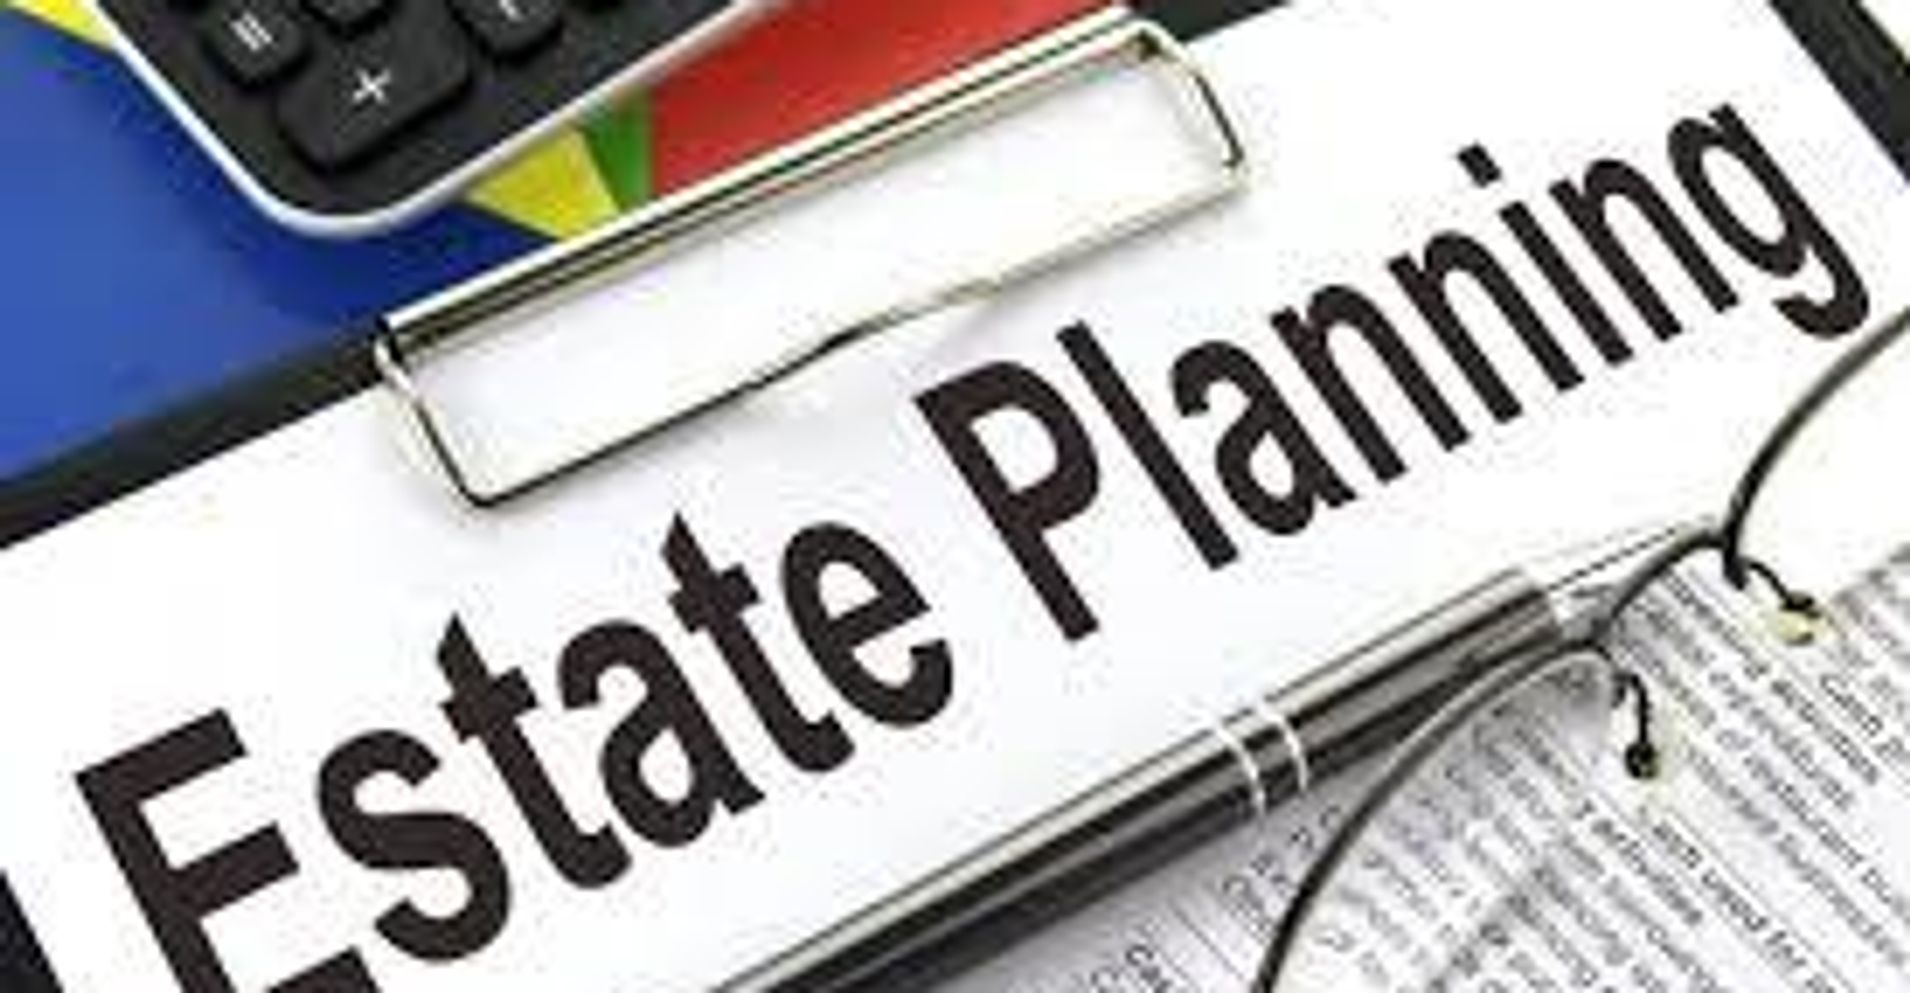 ESTATE PLANNING : The importance of having a Will